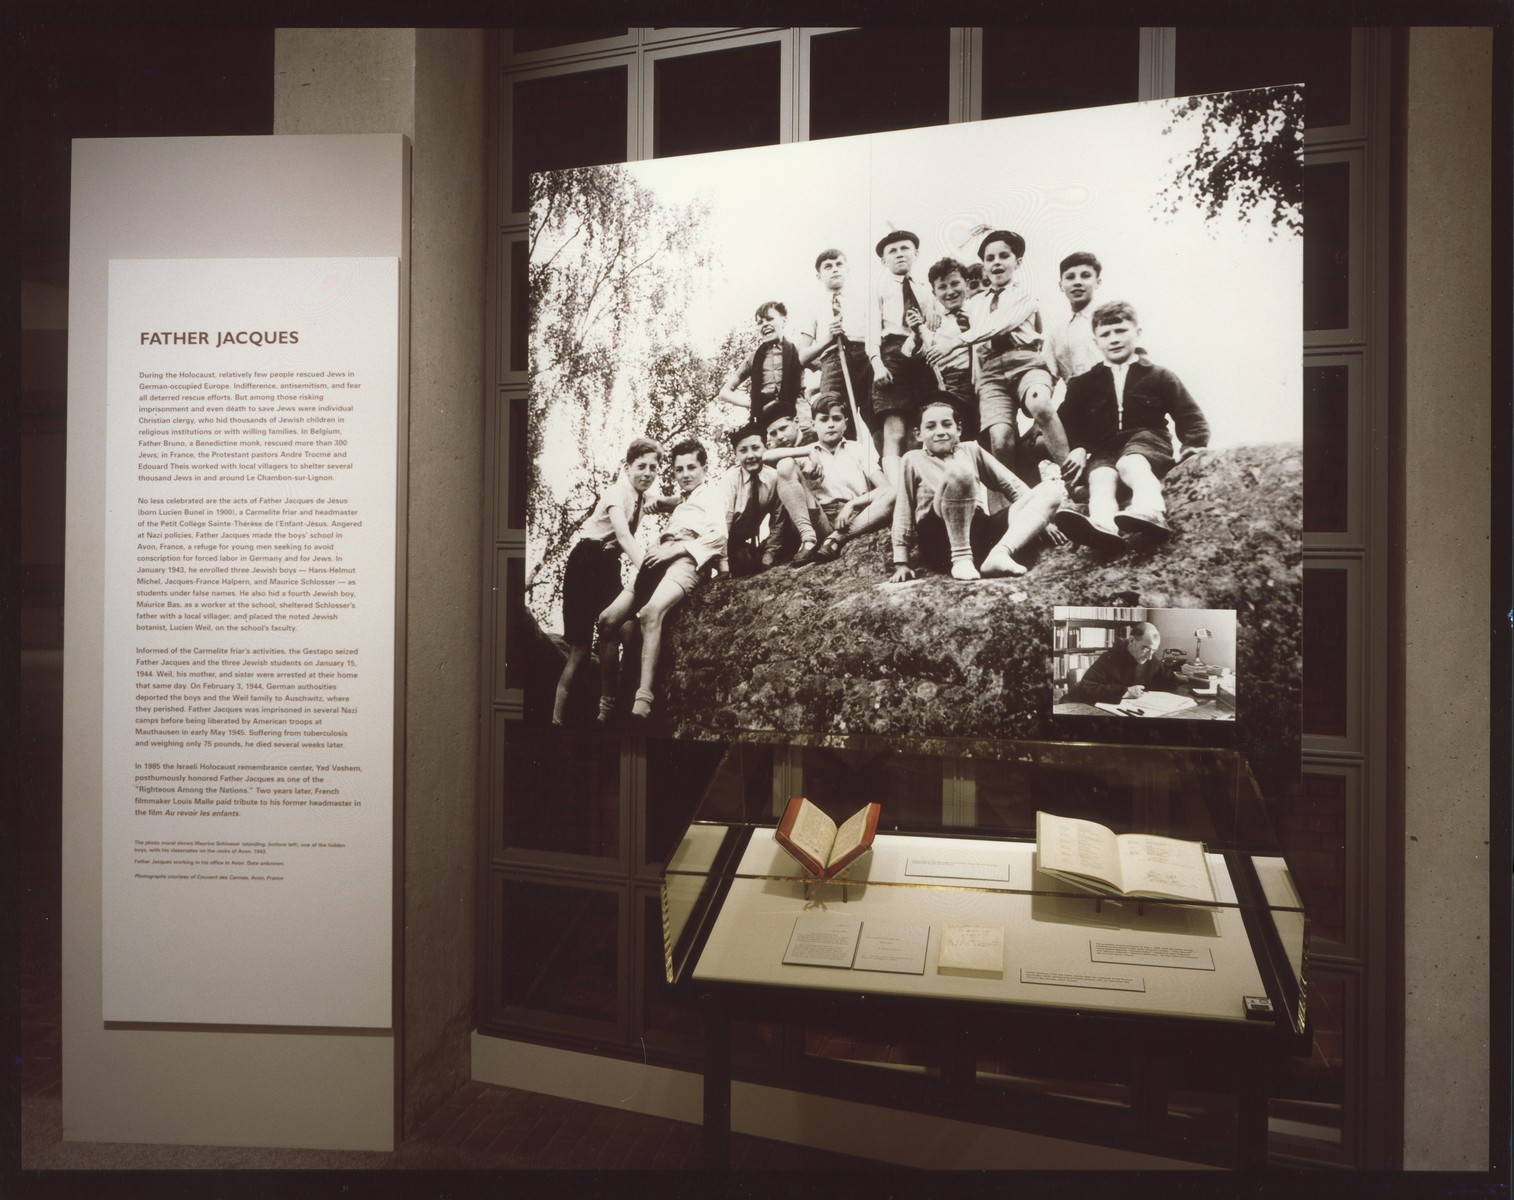 Mural and artifact display case of special exhibit "Father Jaques" in the concourse of the U.S. Holocaust Memorial Museum, May through October 1997.